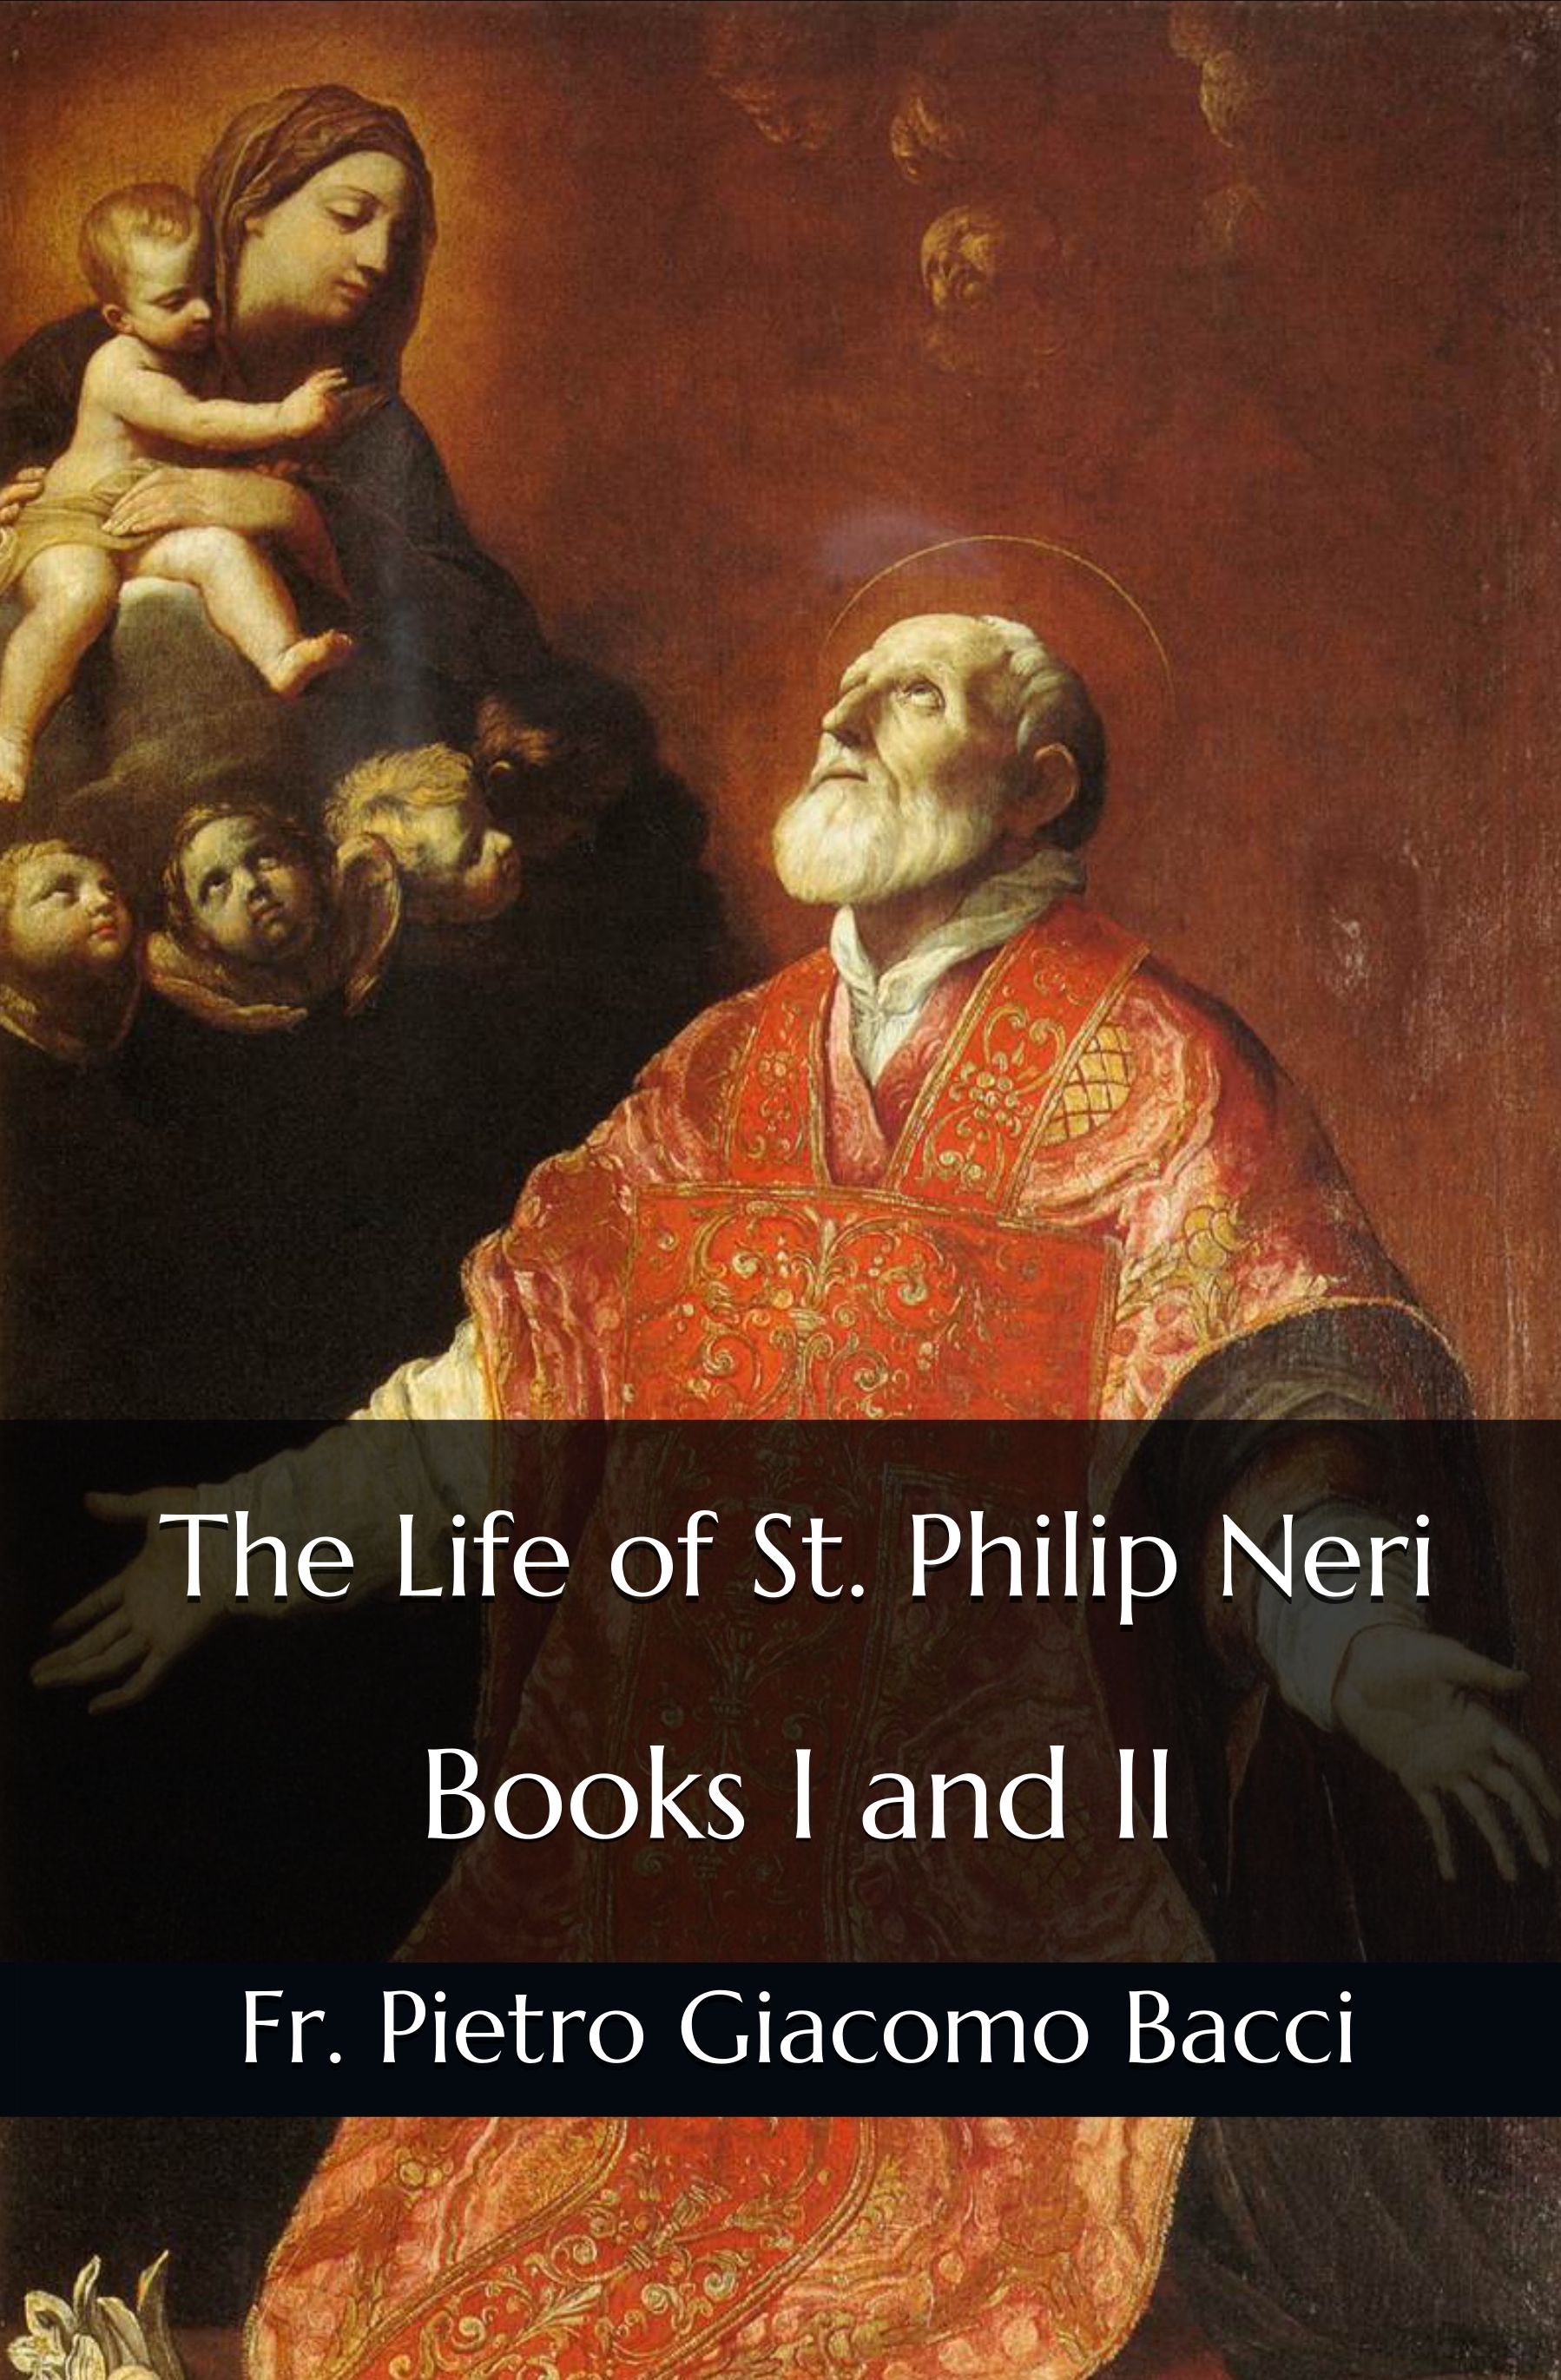 The Life of St. Philip Neri - Books I and II